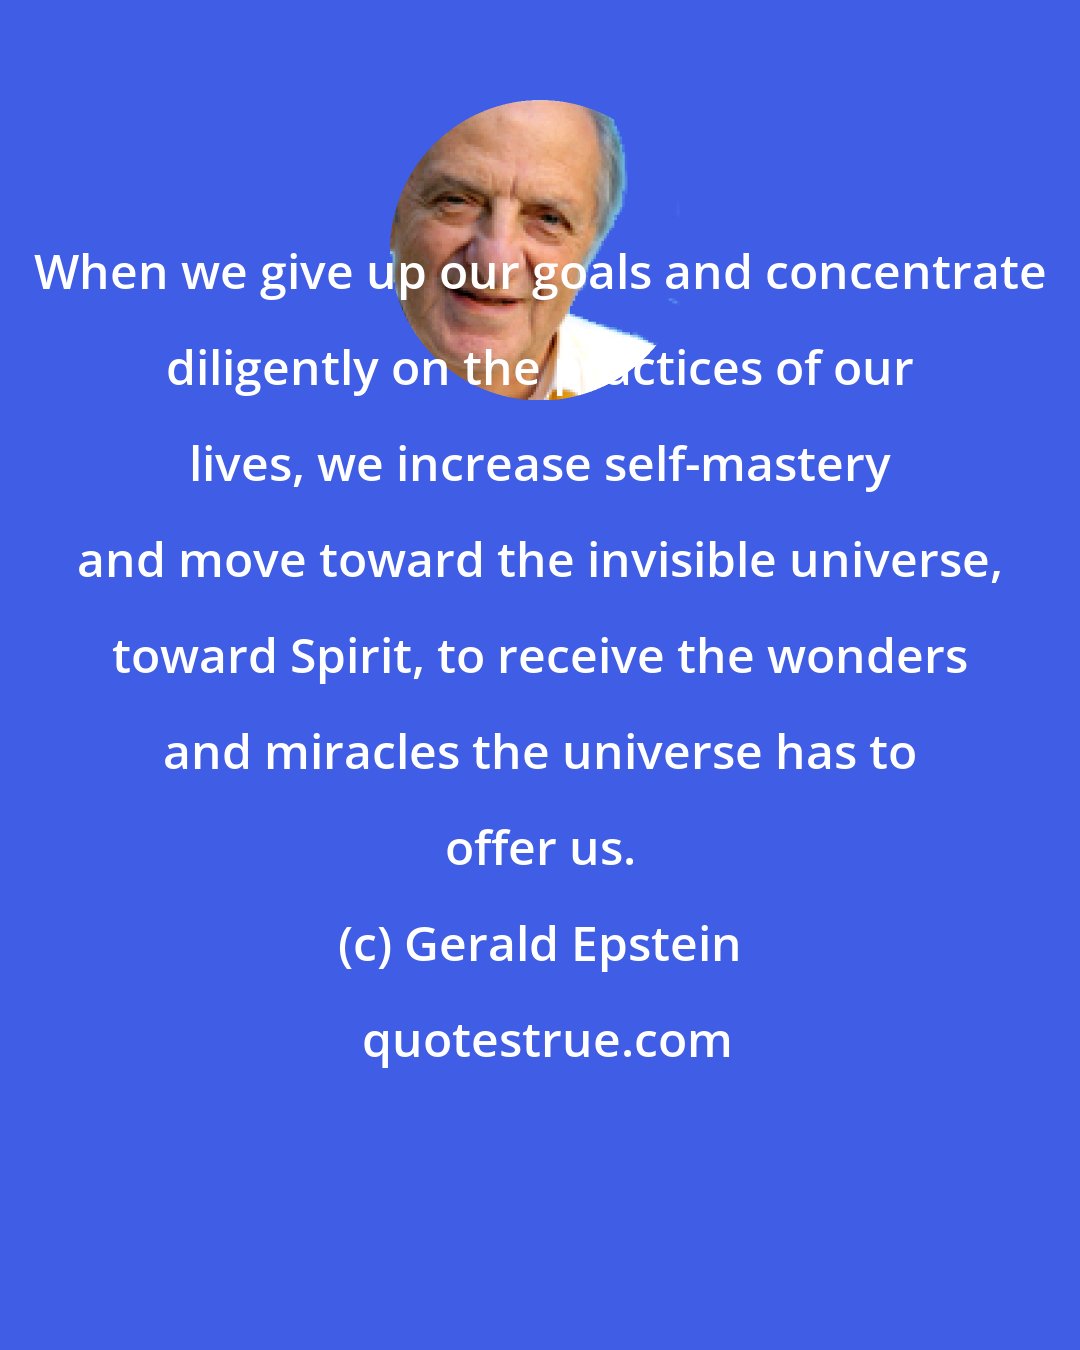 Gerald Epstein: When we give up our goals and concentrate diligently on the practices of our lives, we increase self-mastery and move toward the invisible universe, toward Spirit, to receive the wonders and miracles the universe has to offer us.